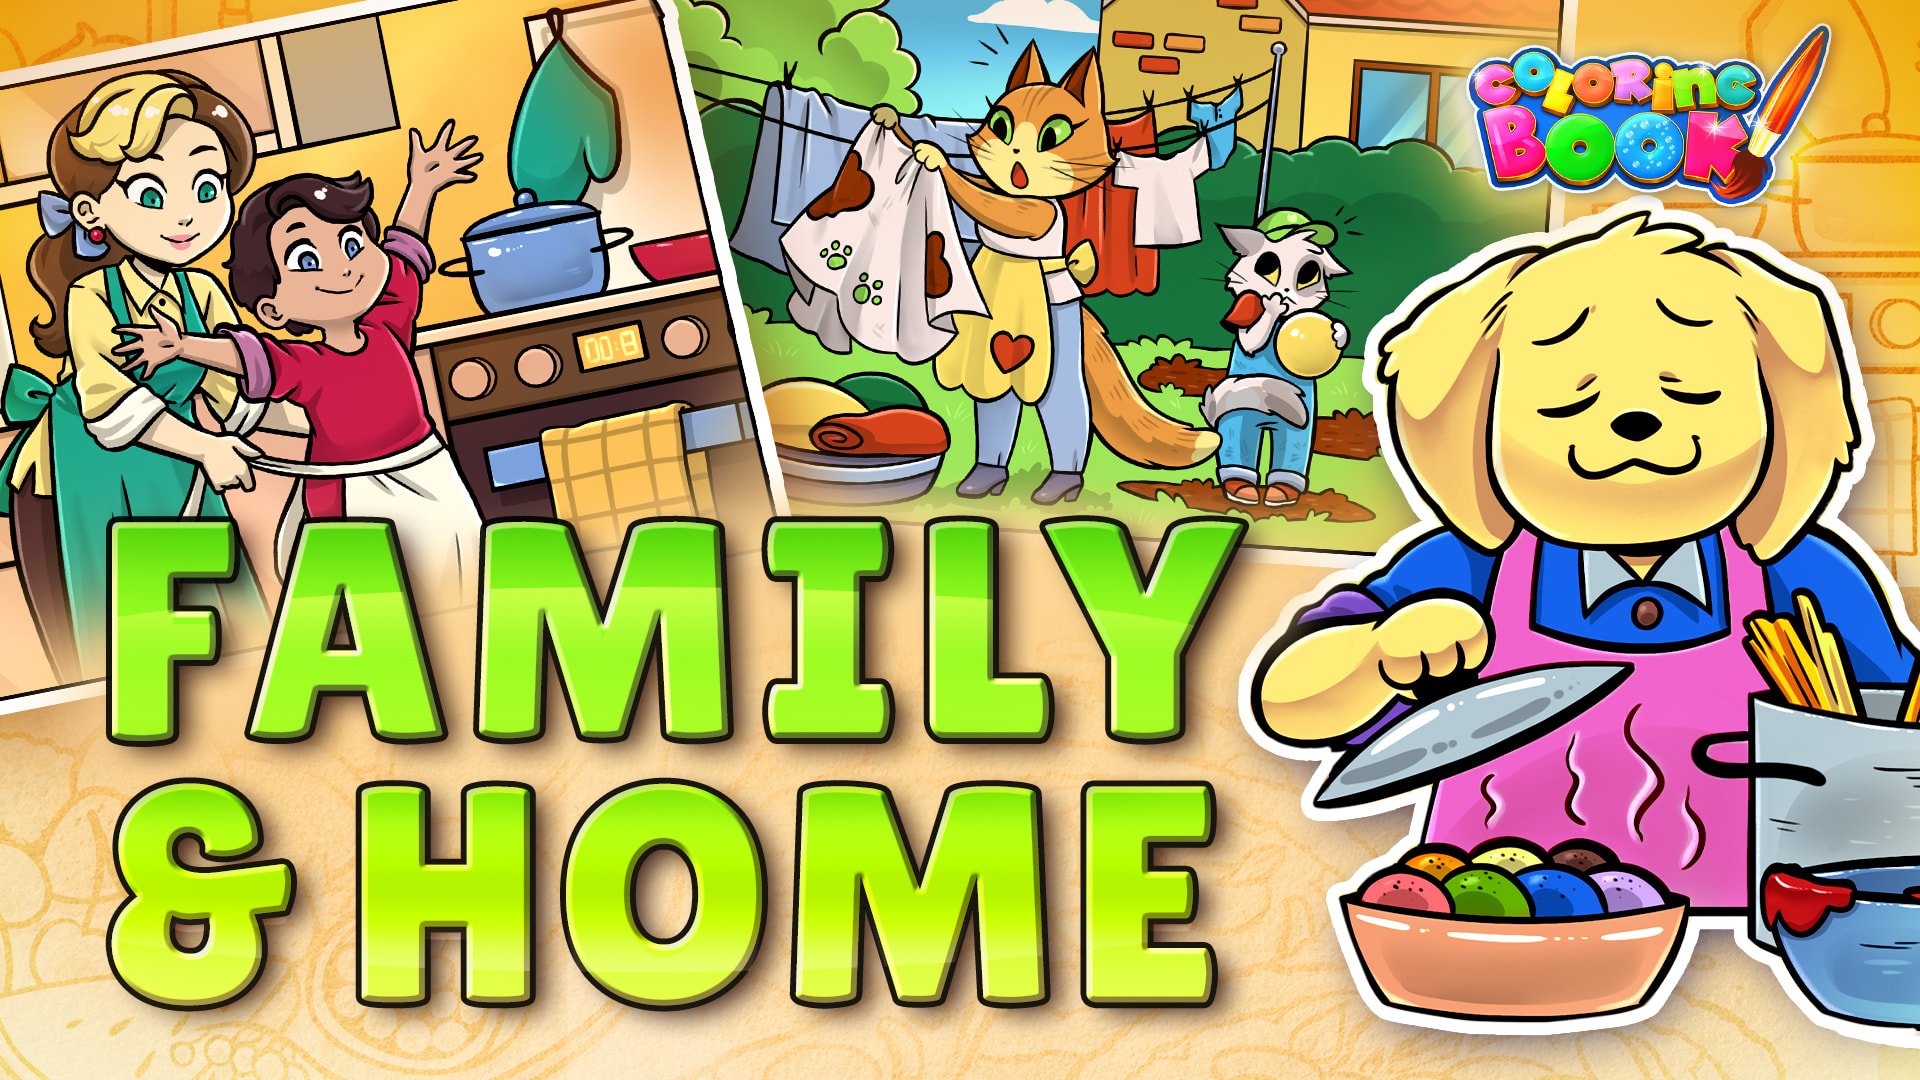 Coloring Book: Family & Home 1